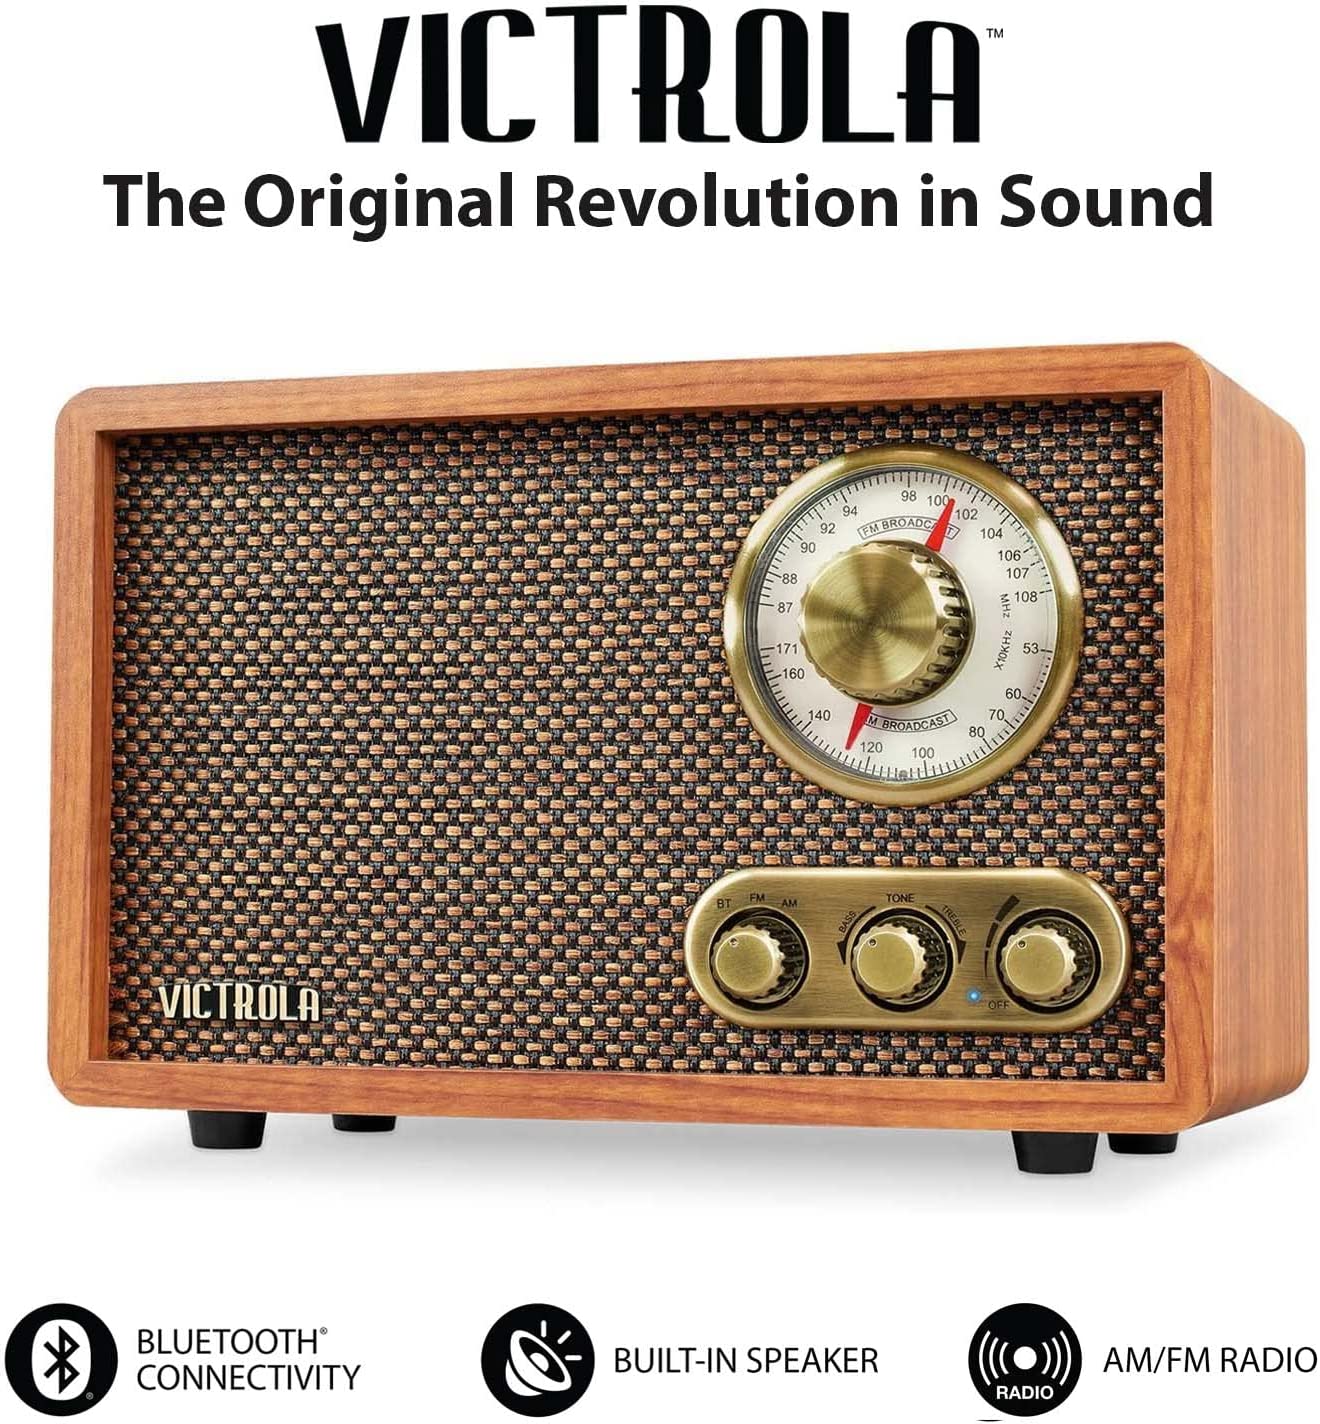 An old school vintage style radio with modern technology. The text reads, "Victrola, the original revolution in sound. Bluetooth connectivity, built in speaker, AM/FM radio."